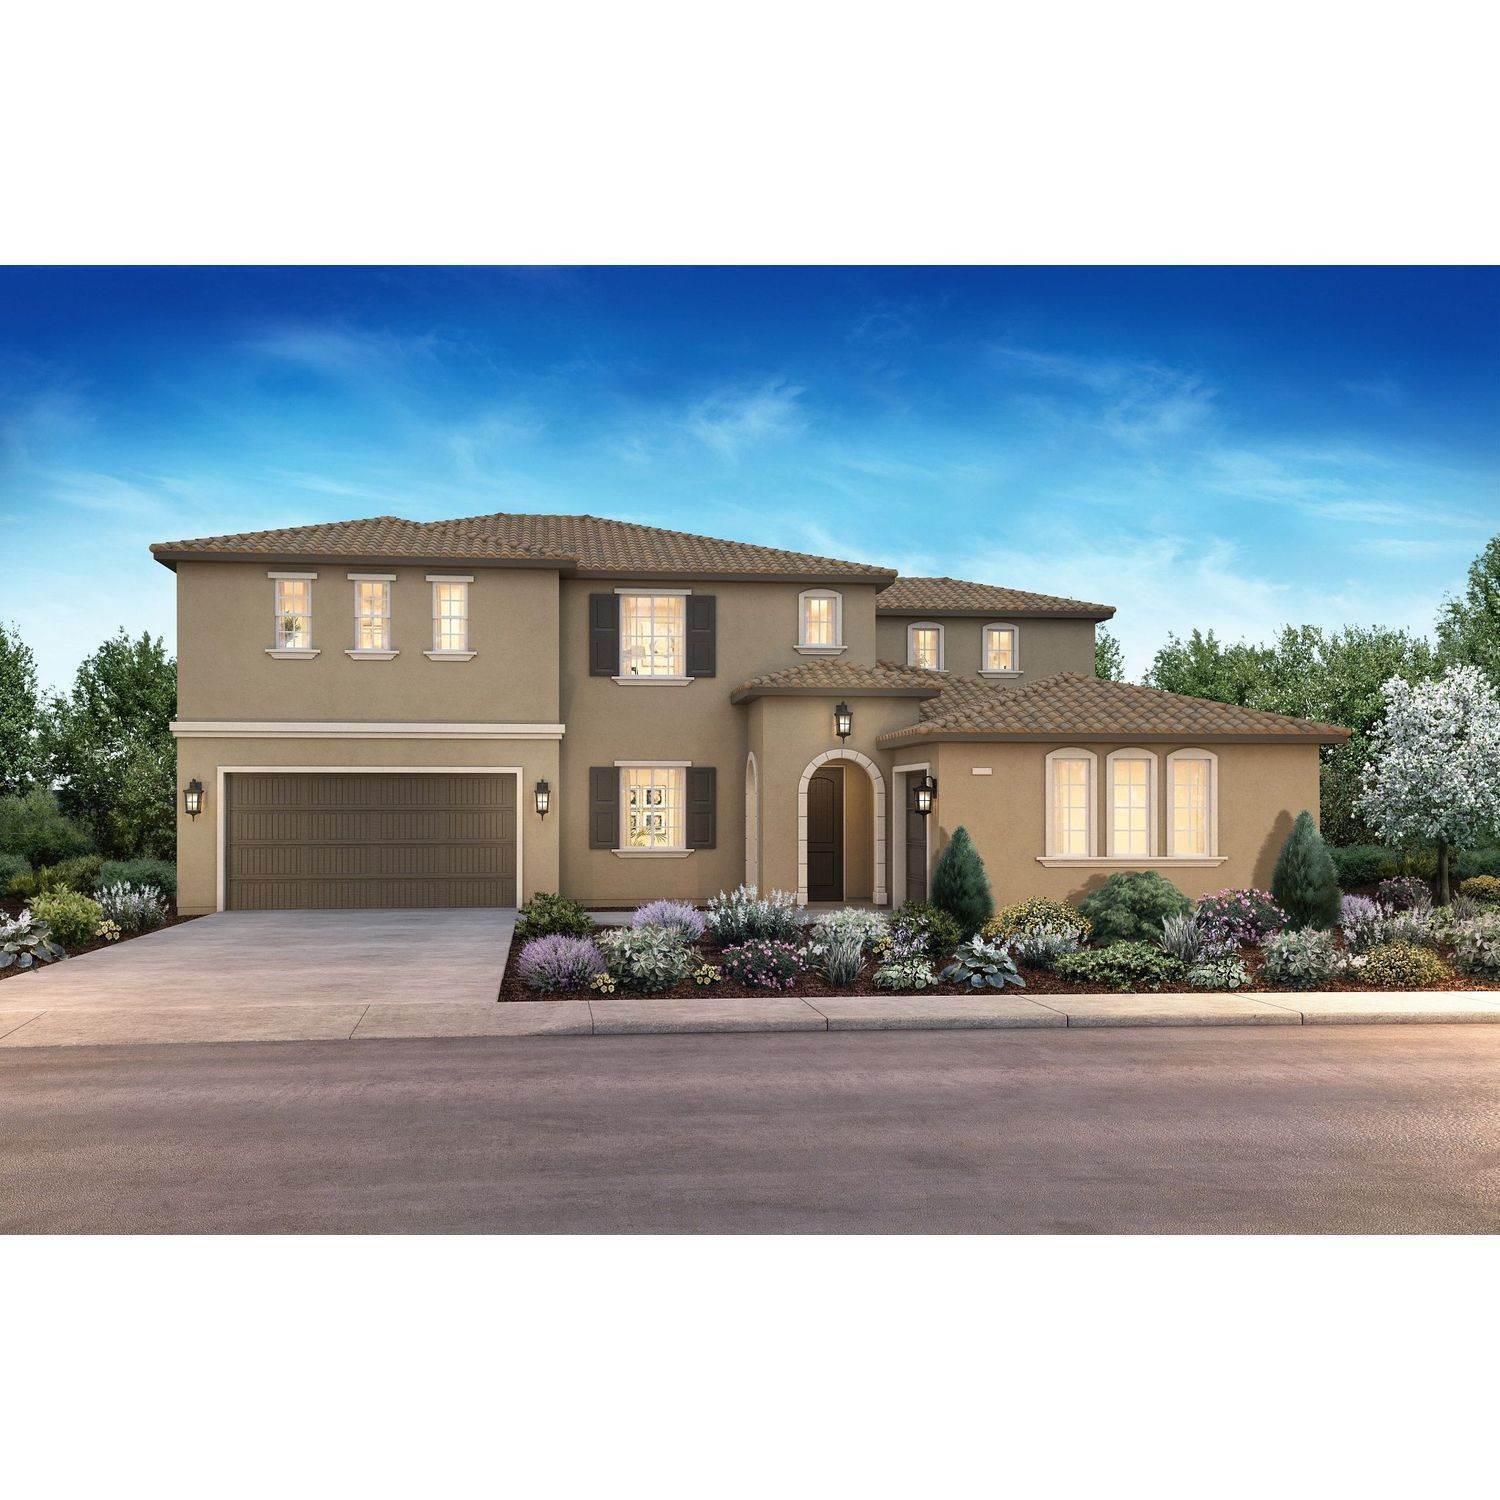 Single Family for Active at Orchard Trails - Plan 3 154 Continente Ave BRENTWOOD, CALIFORNIA 94513 UNITED STATES